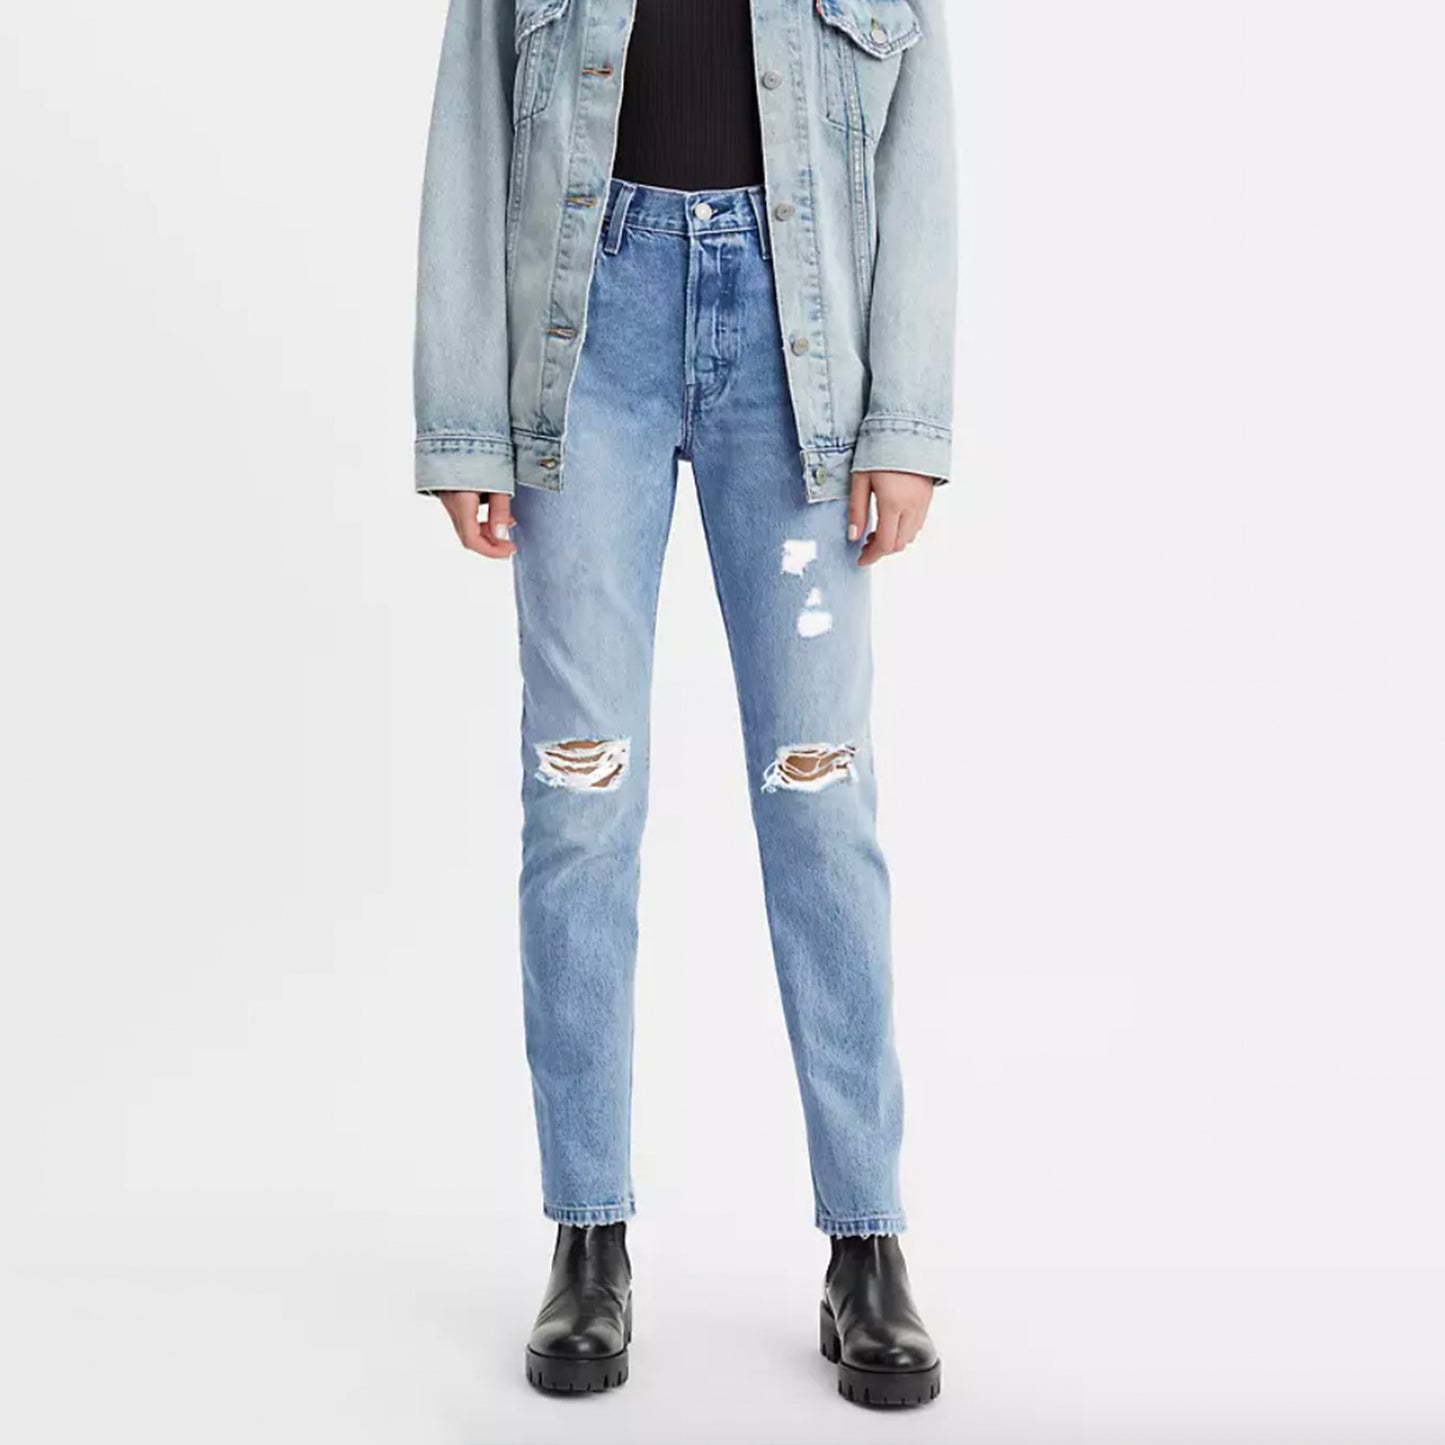 Levi's Jeans For Women Long Bottoms. Literally the blueprint for every pair of jeans in existence. To this day they've never gone out of style. And they never will